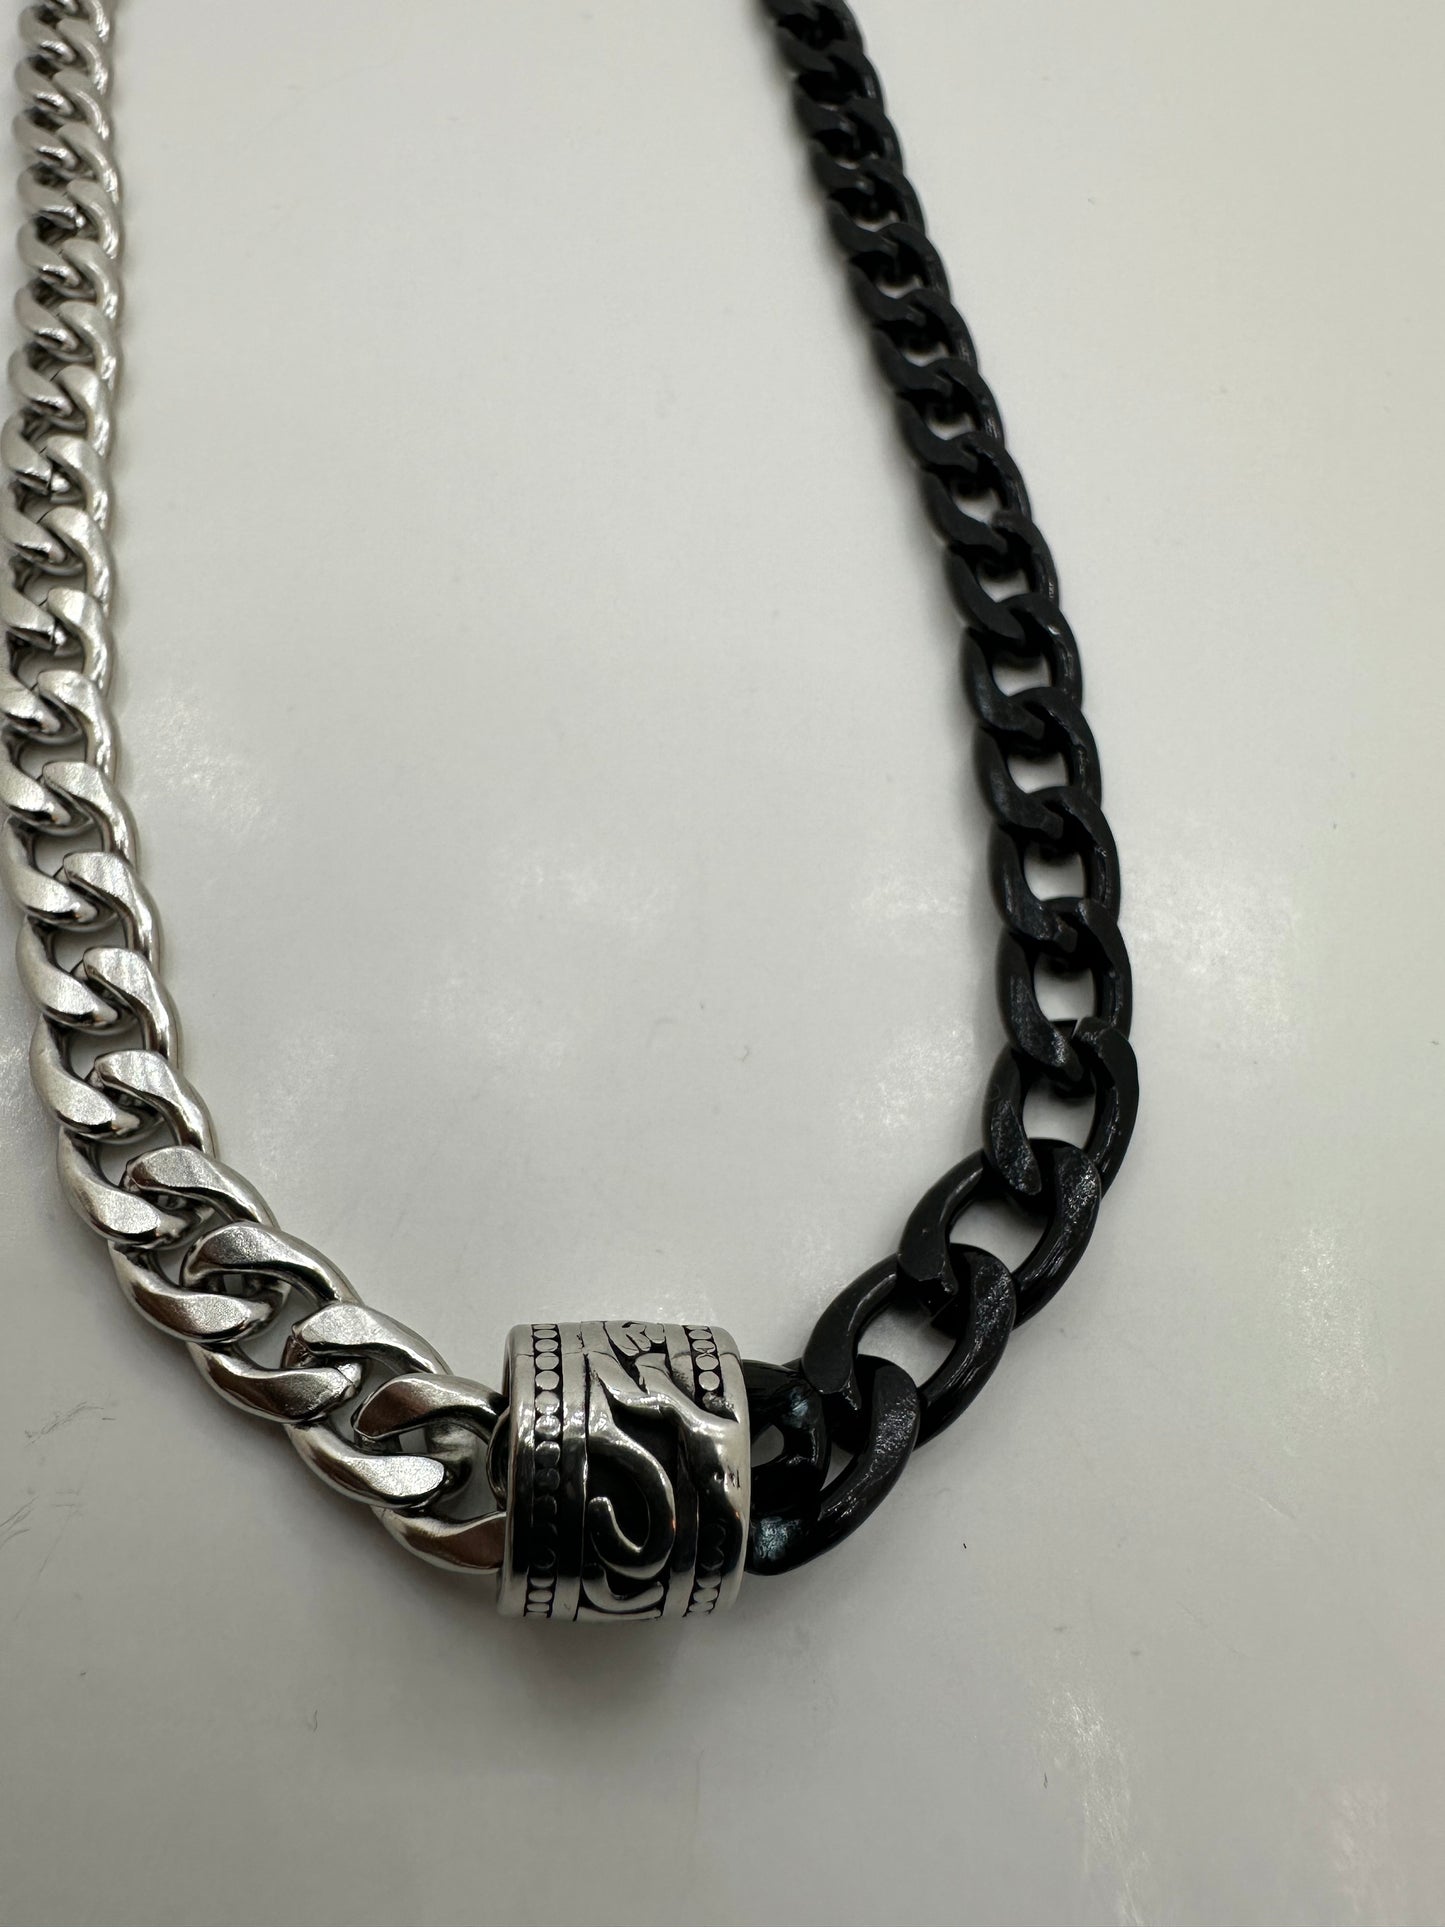 Black and Silver Color Chain Necklace